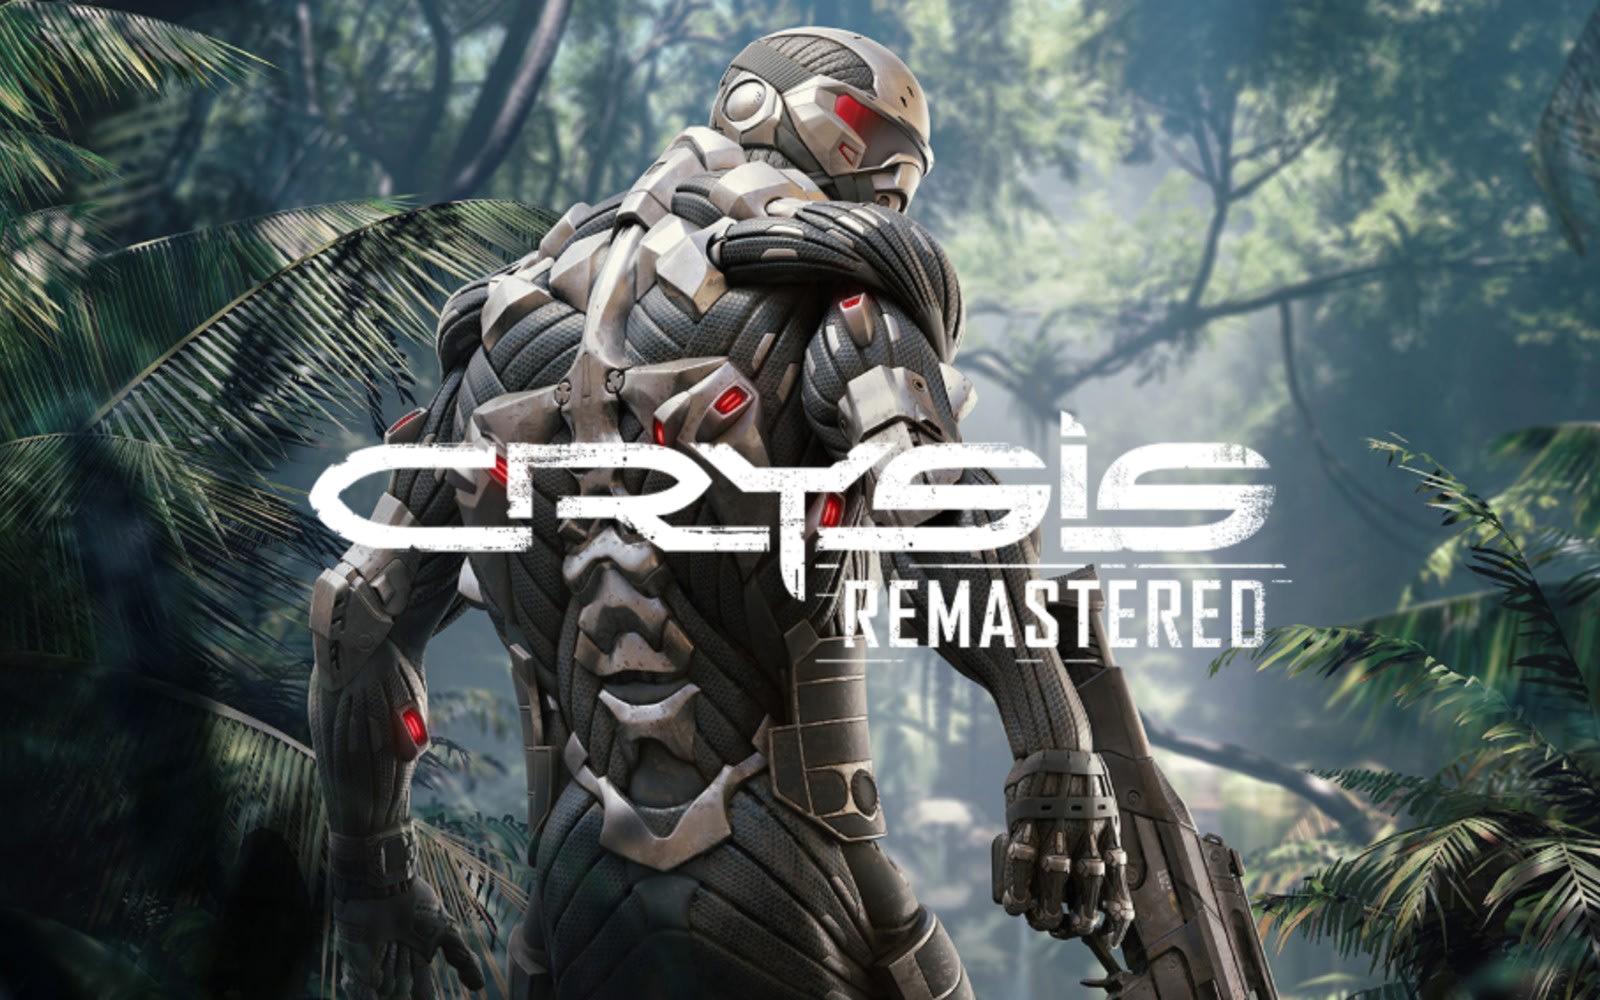 ps4 - Crysis Remastered 